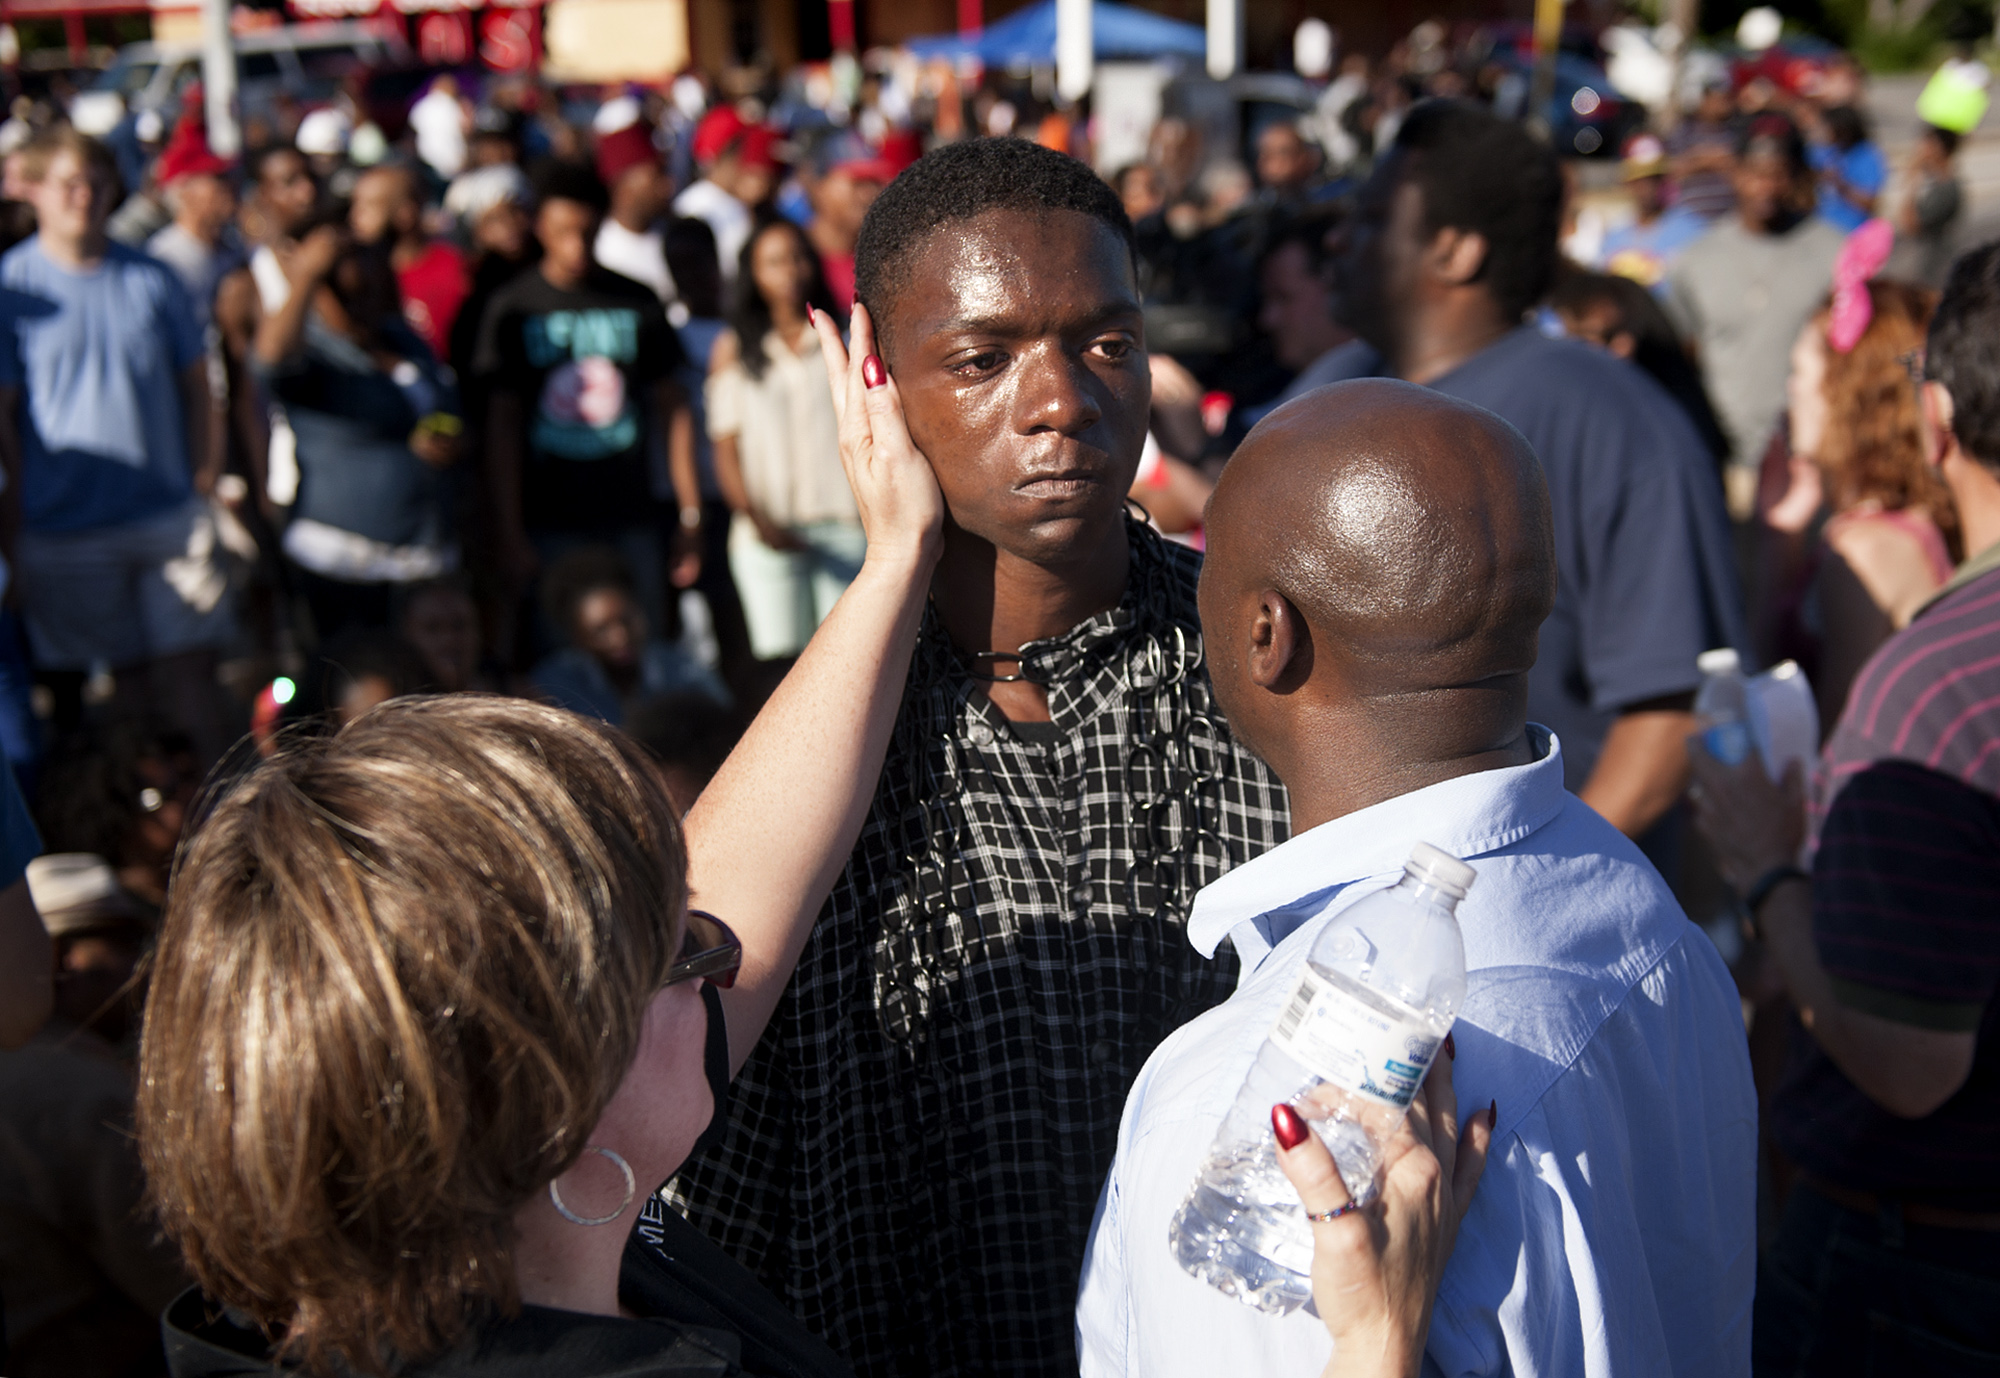 The Rev. Willis Johnson confronts 18-year-old Joshua Wilson as protesters defy police and block traffic on West Florissant Avenue at Canfield Drive in Ferguson, Mo. on Aug. 13, 2014.